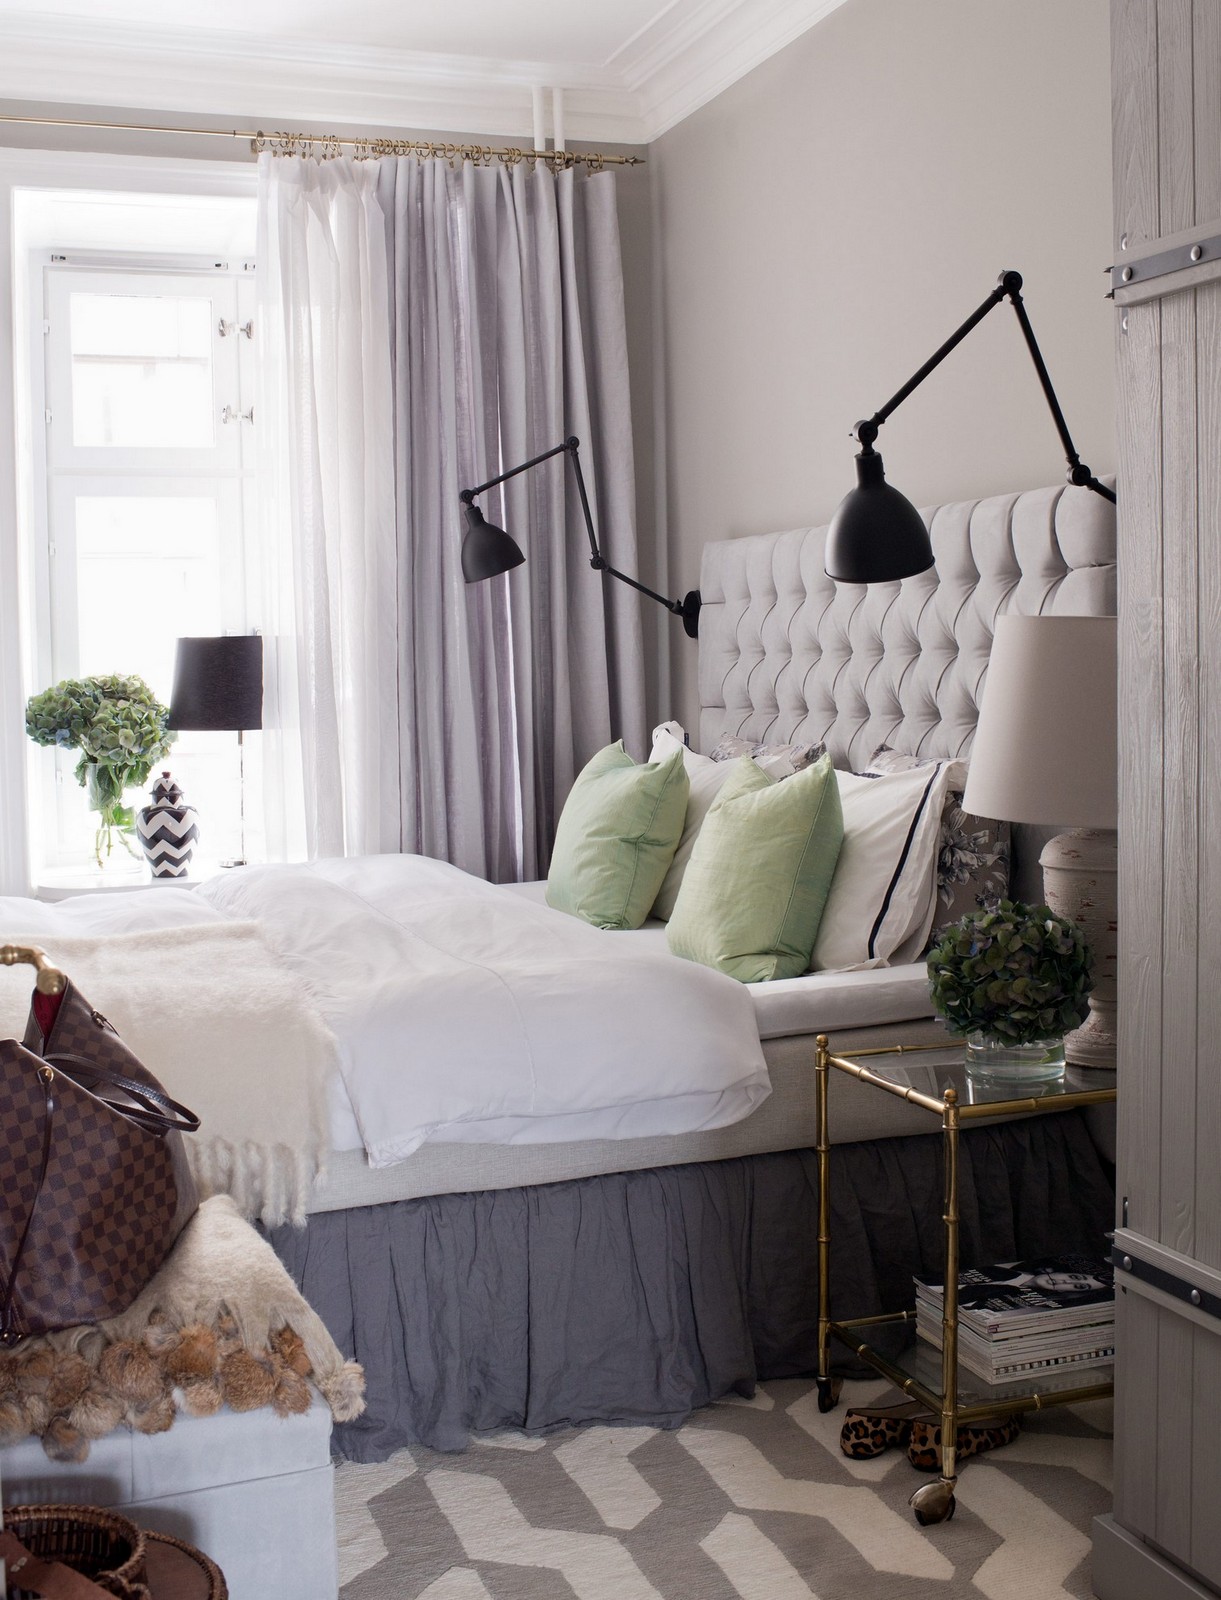 Bedroom Wall Sconces: A Touch Of Ambiance And Style